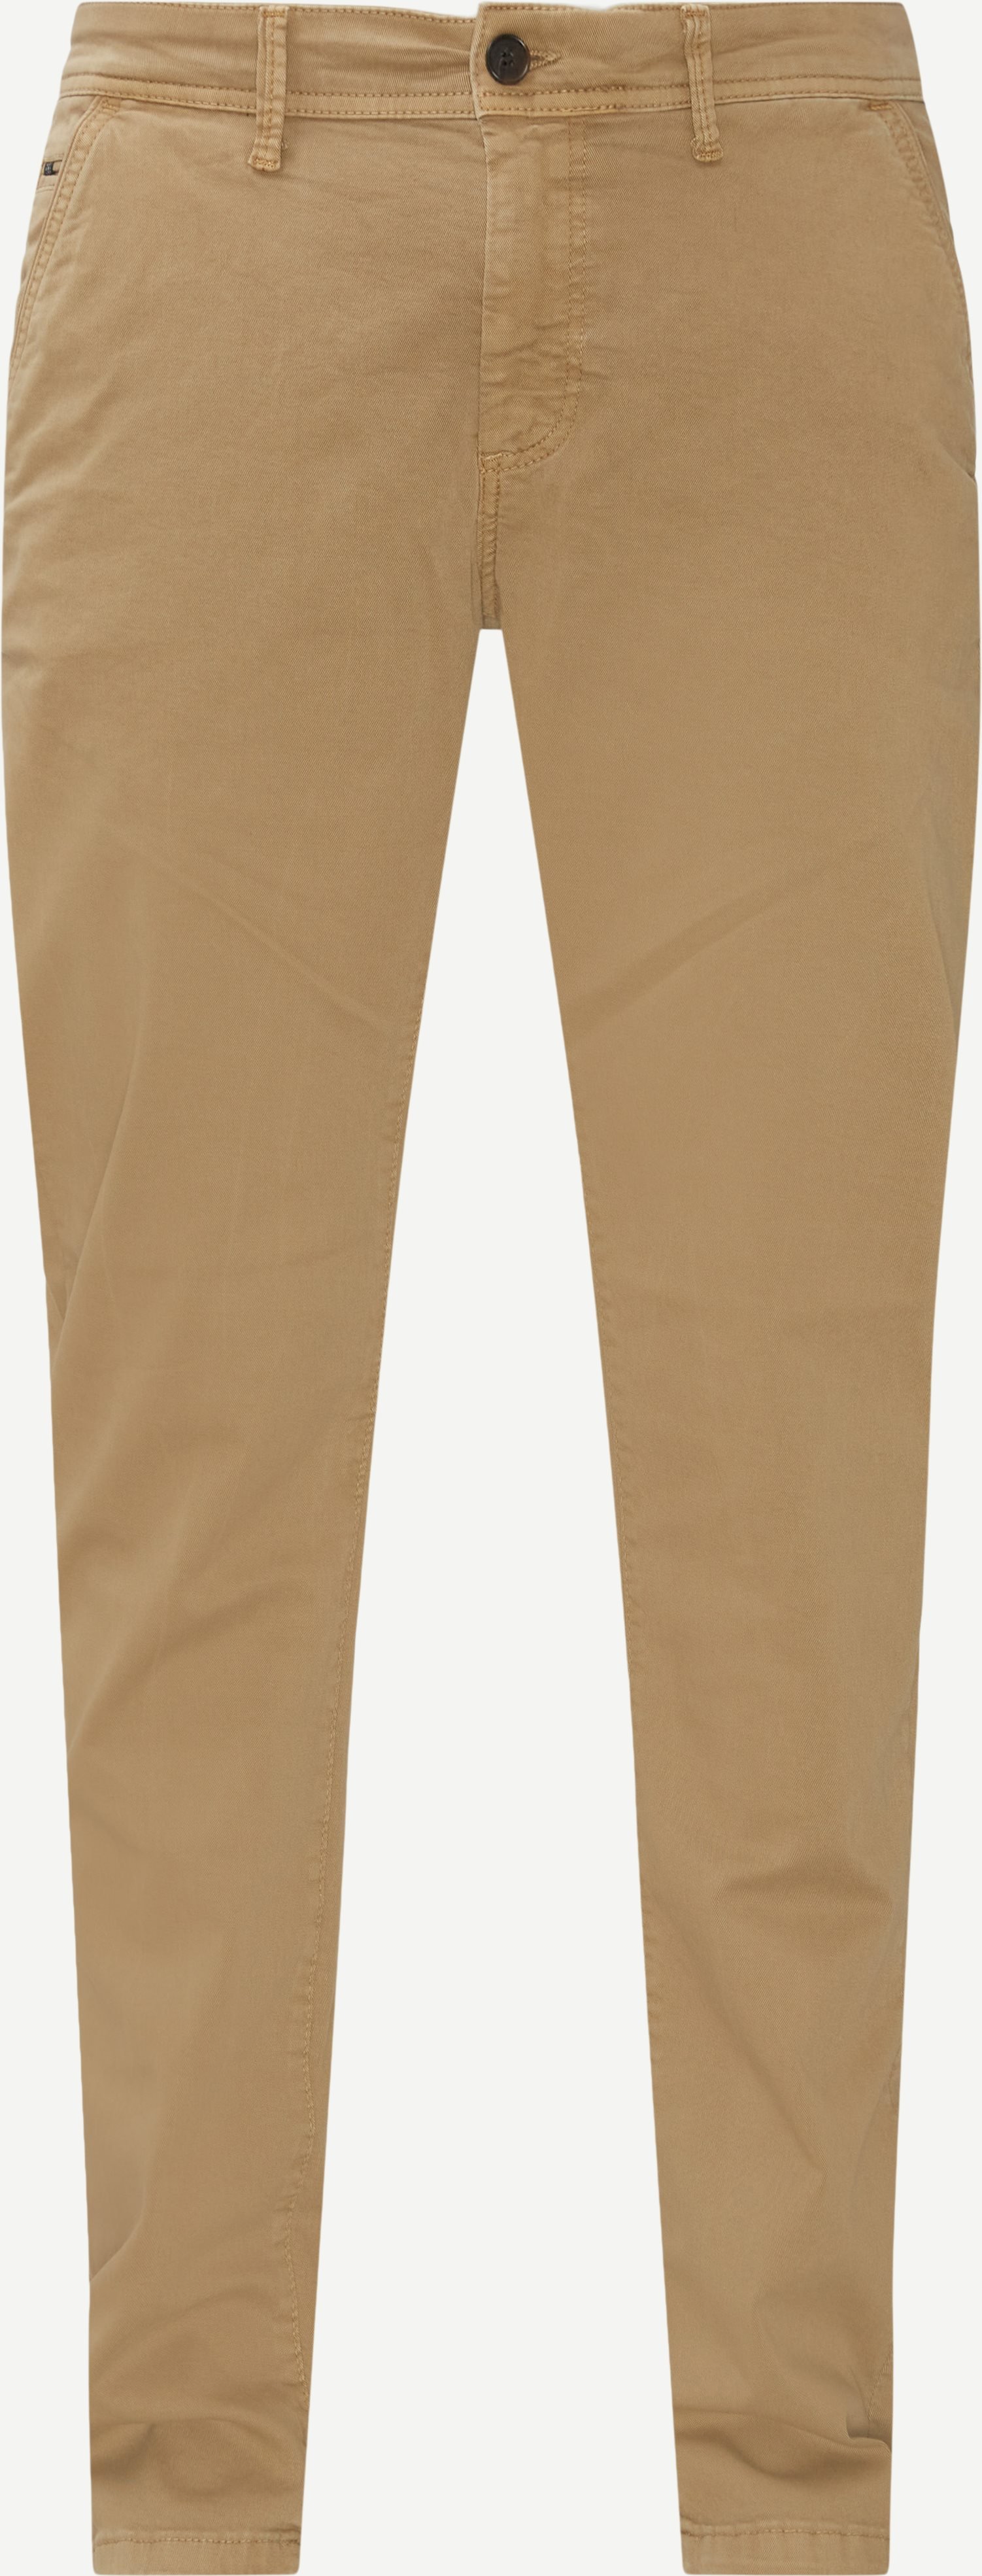 Byxor - Tapered fit - Sand